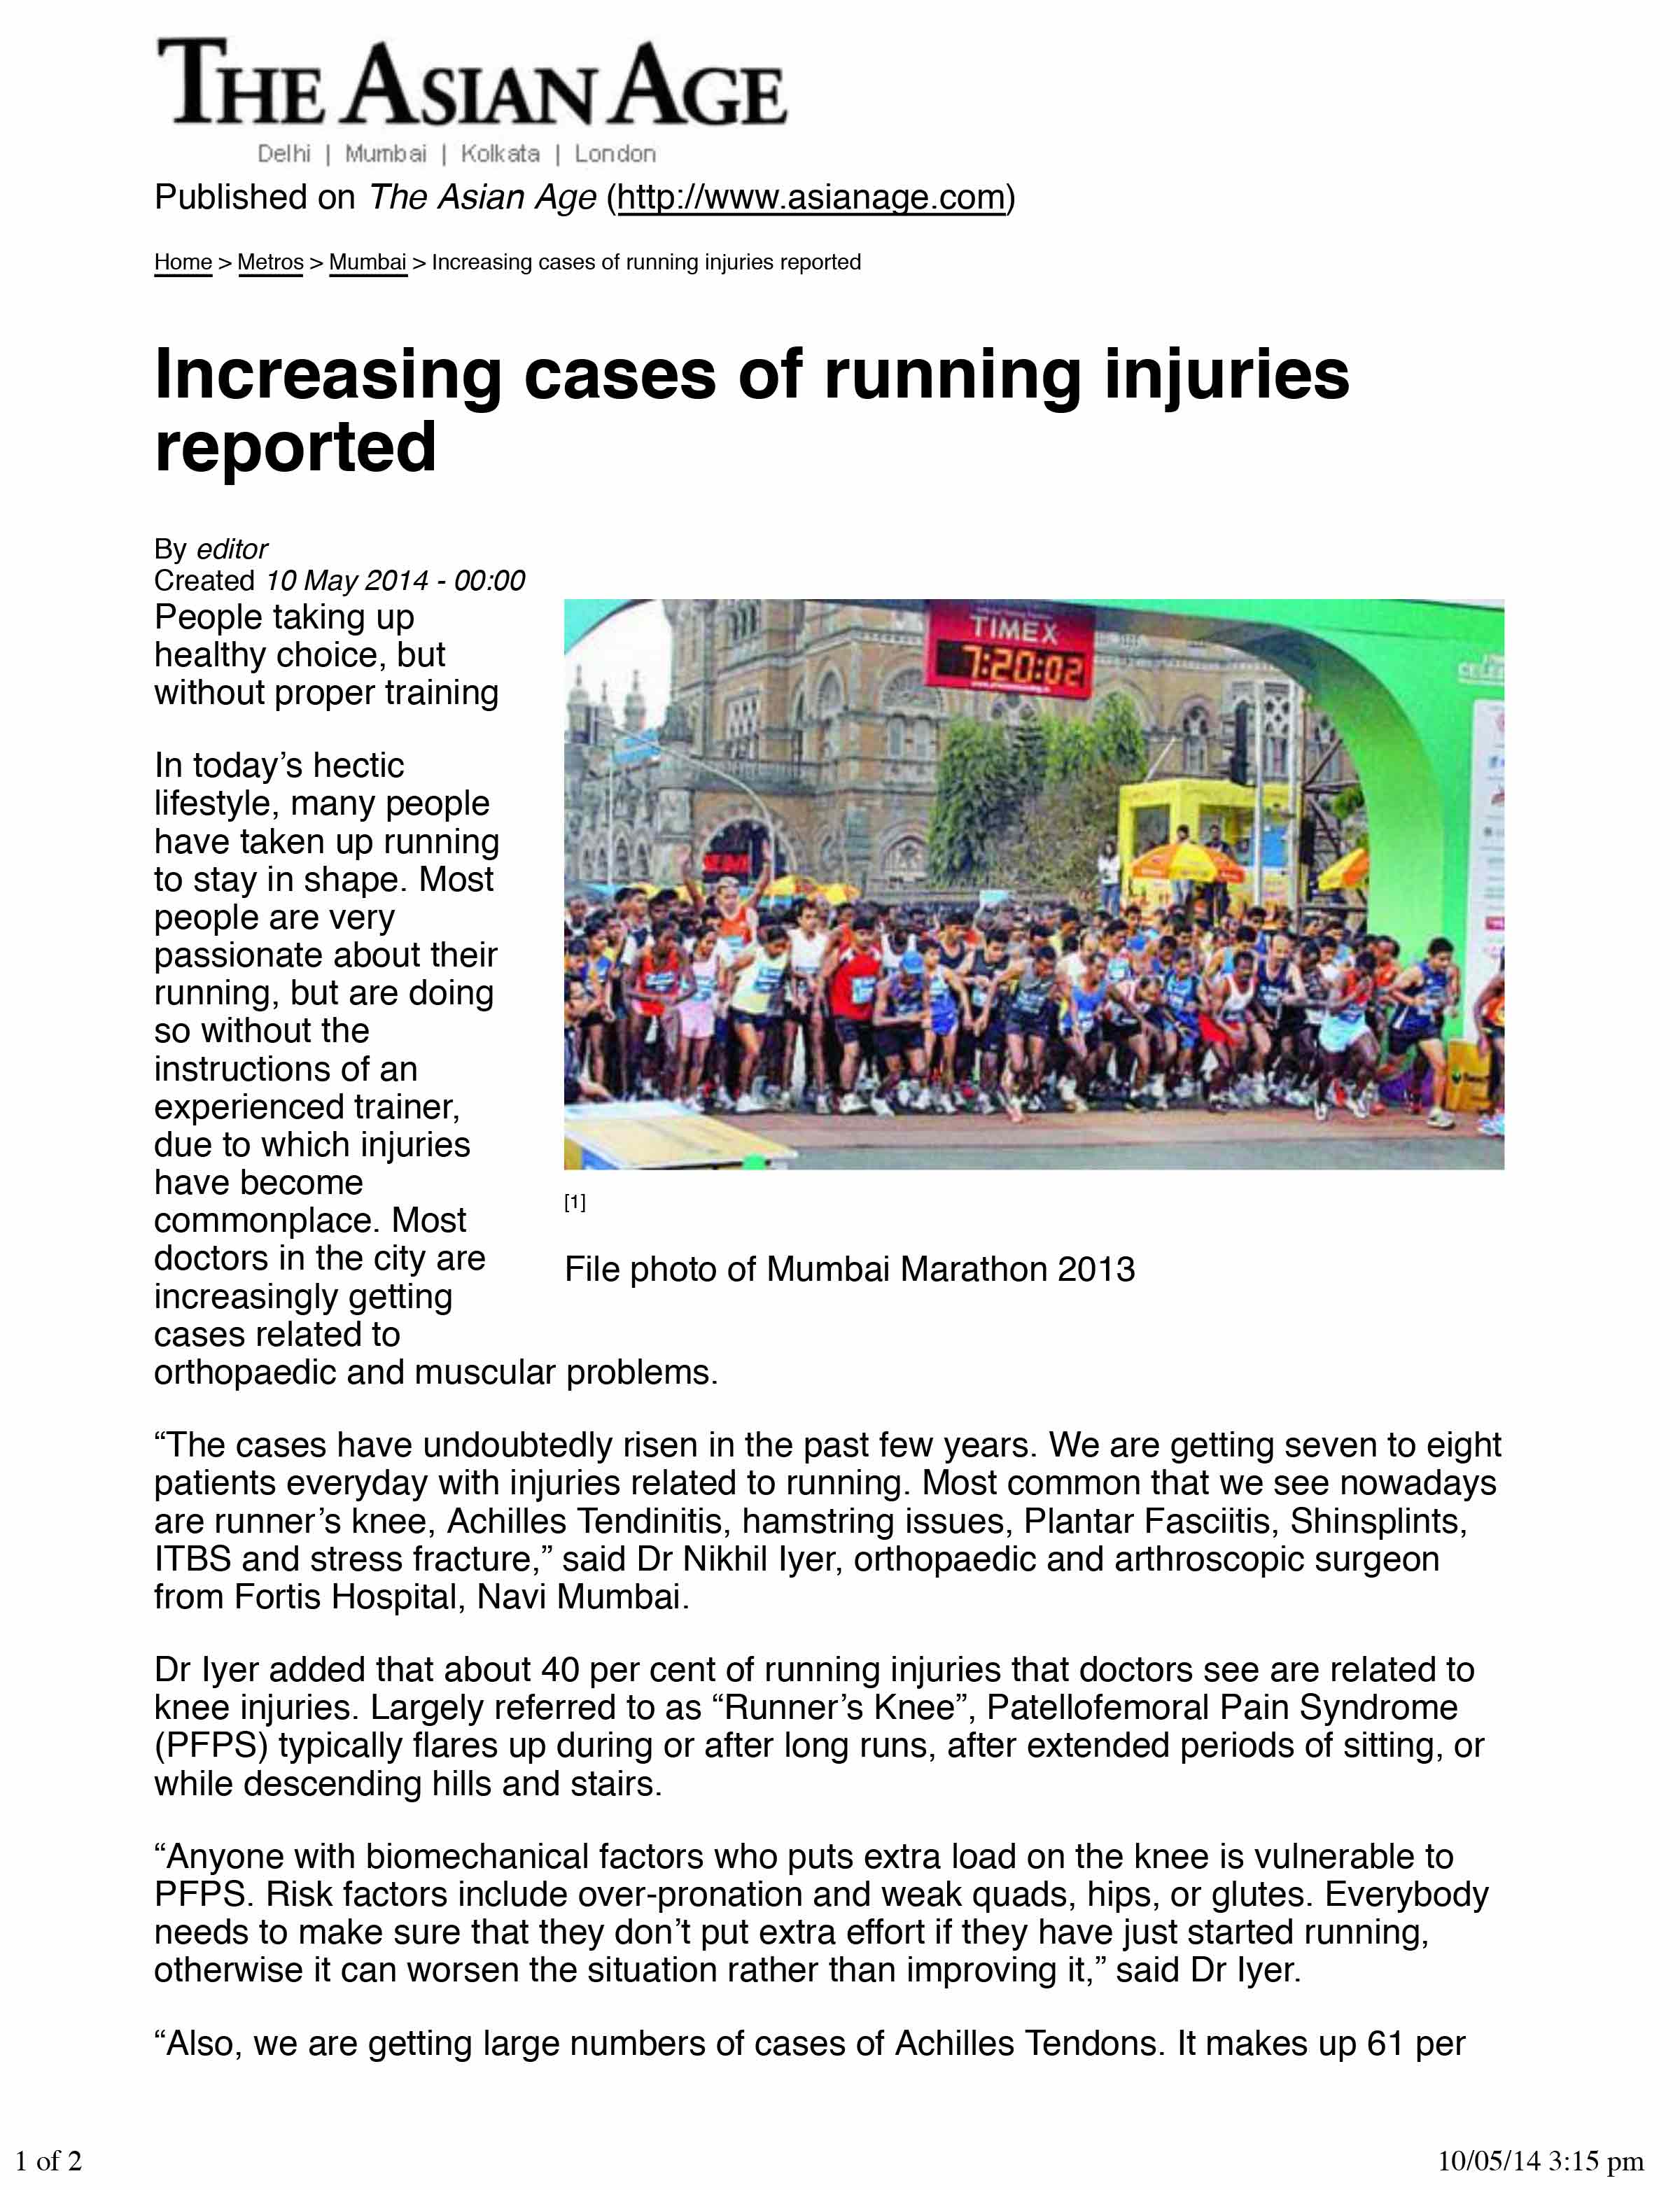 increasing cases of running injuries reported